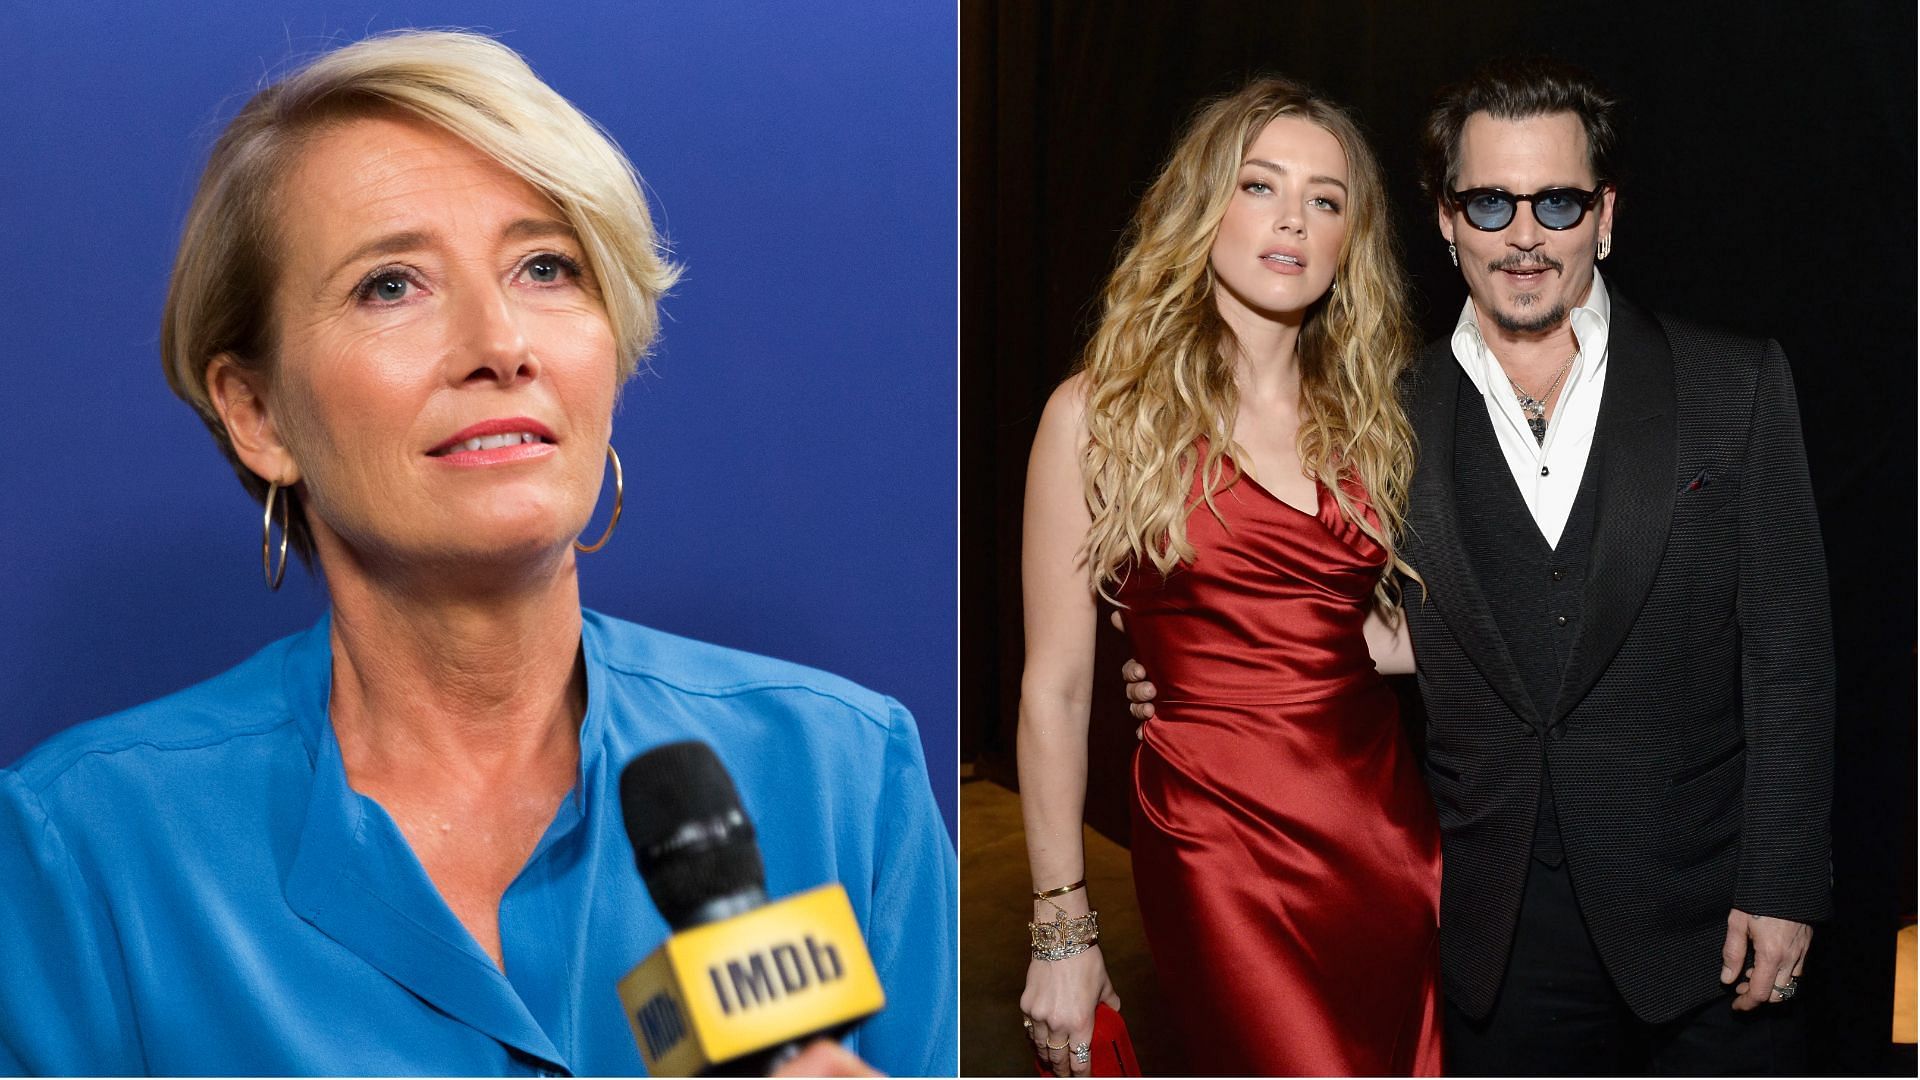 Emma Thompson has been a staunch supporter of the #MeToo movement. (Image via Getty Images/Rich Polk/Michael Kovac)